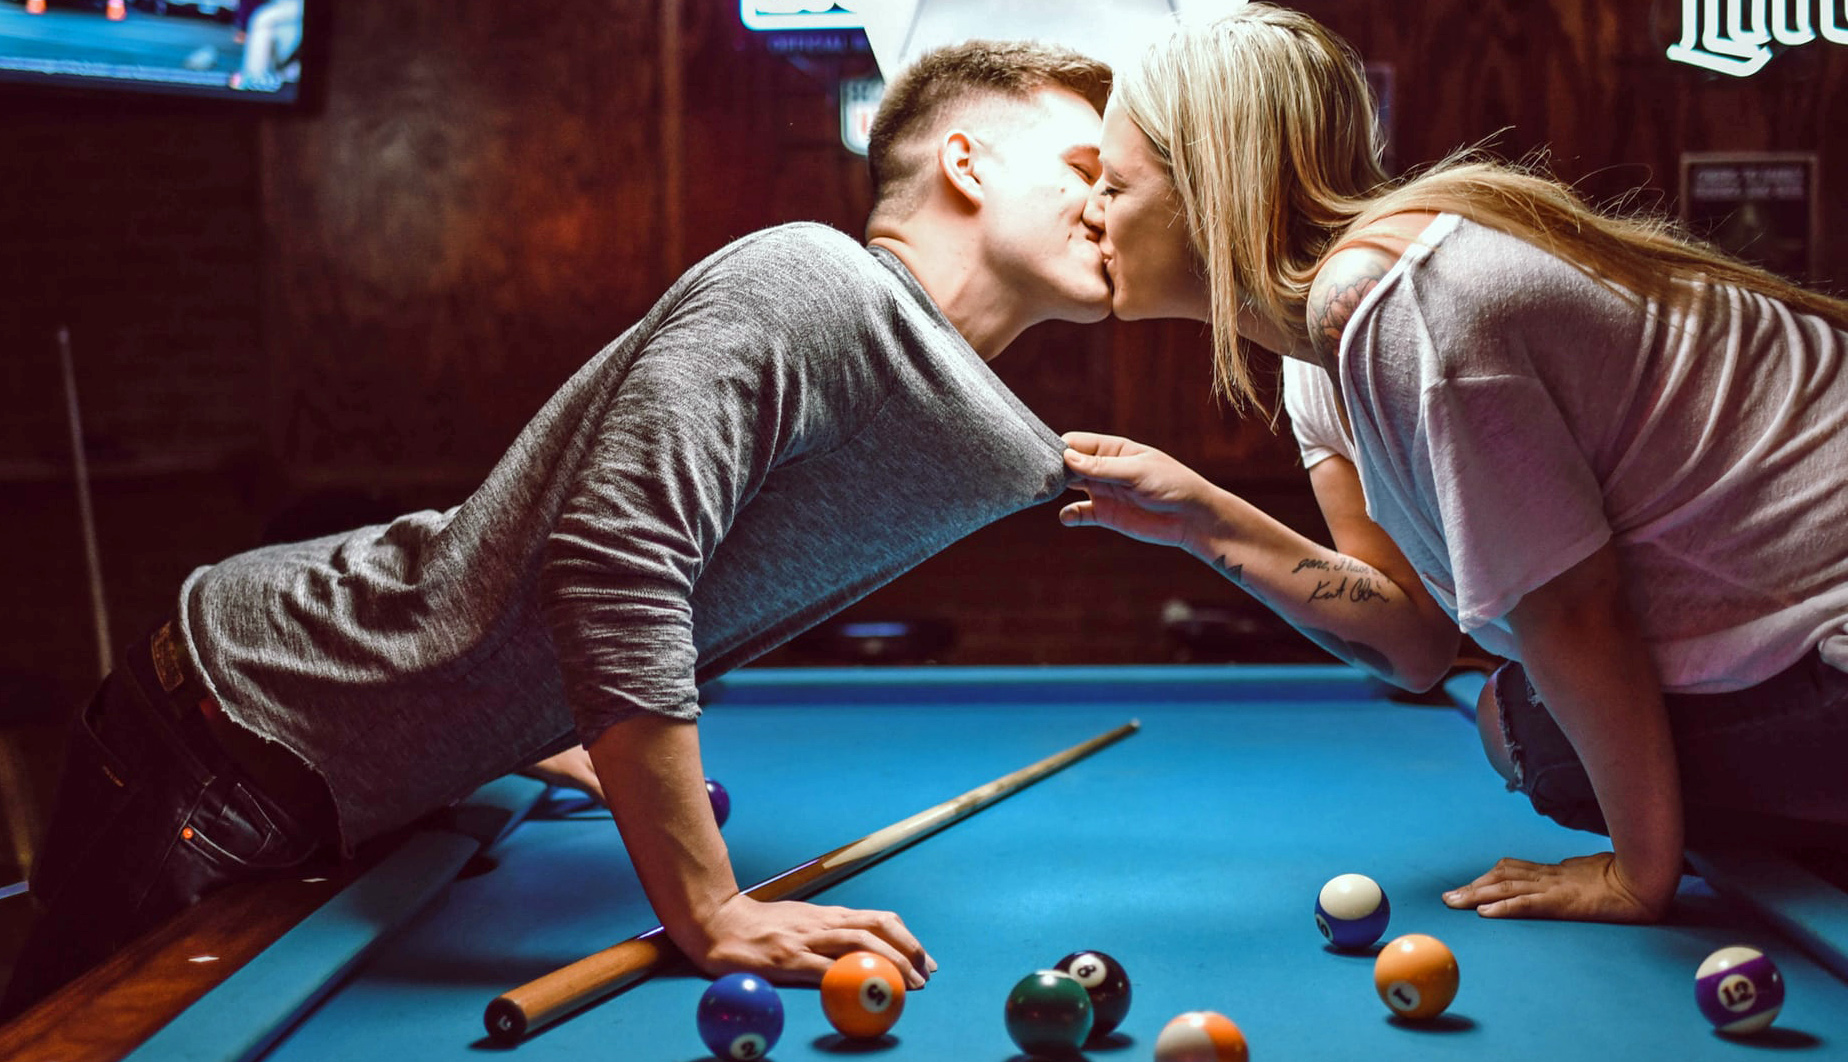 How To Have A Casual Hookup And Not Feel Guilty About It